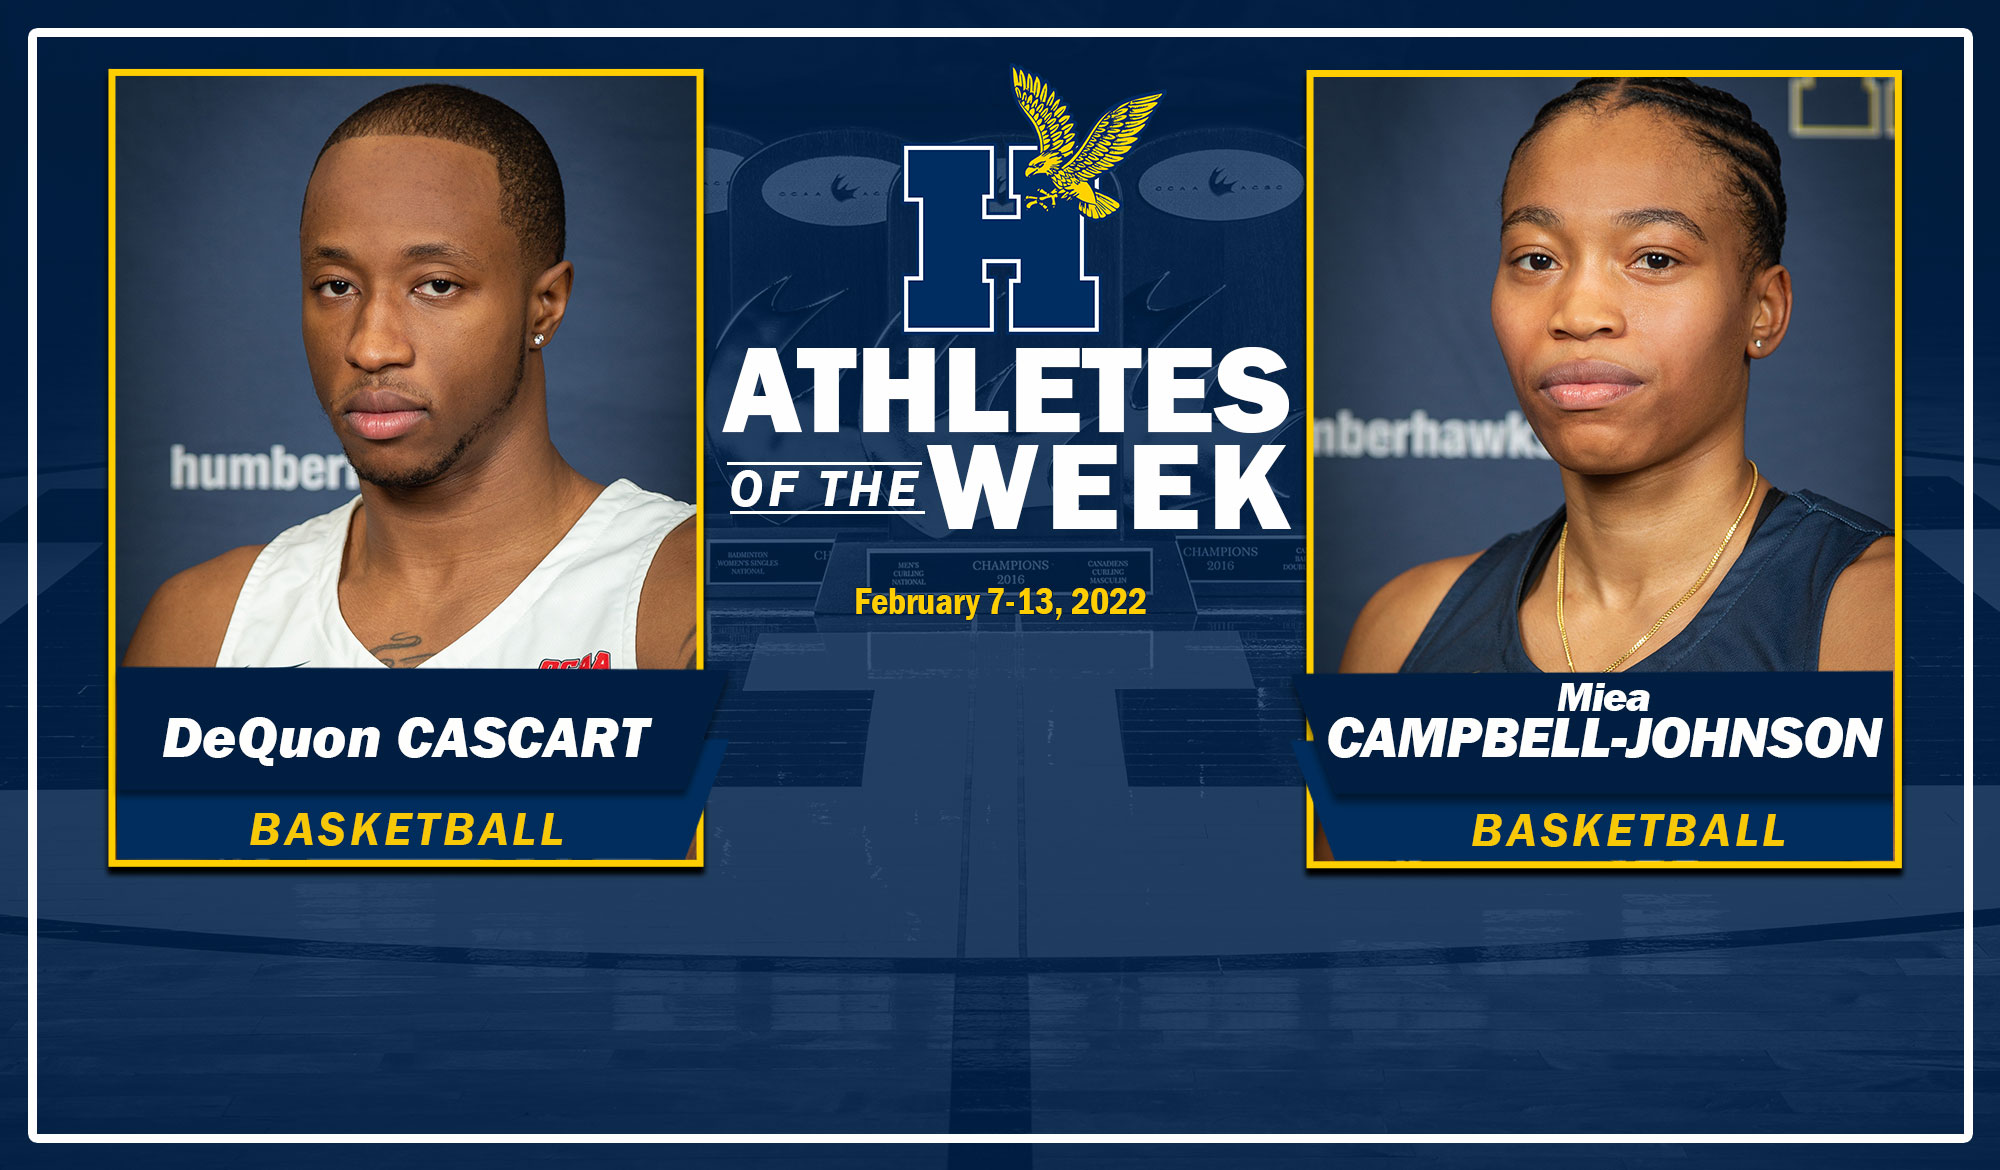 DeQuon Cascart and Miea Campbell-Johnson named Humber Athlete's of the Week